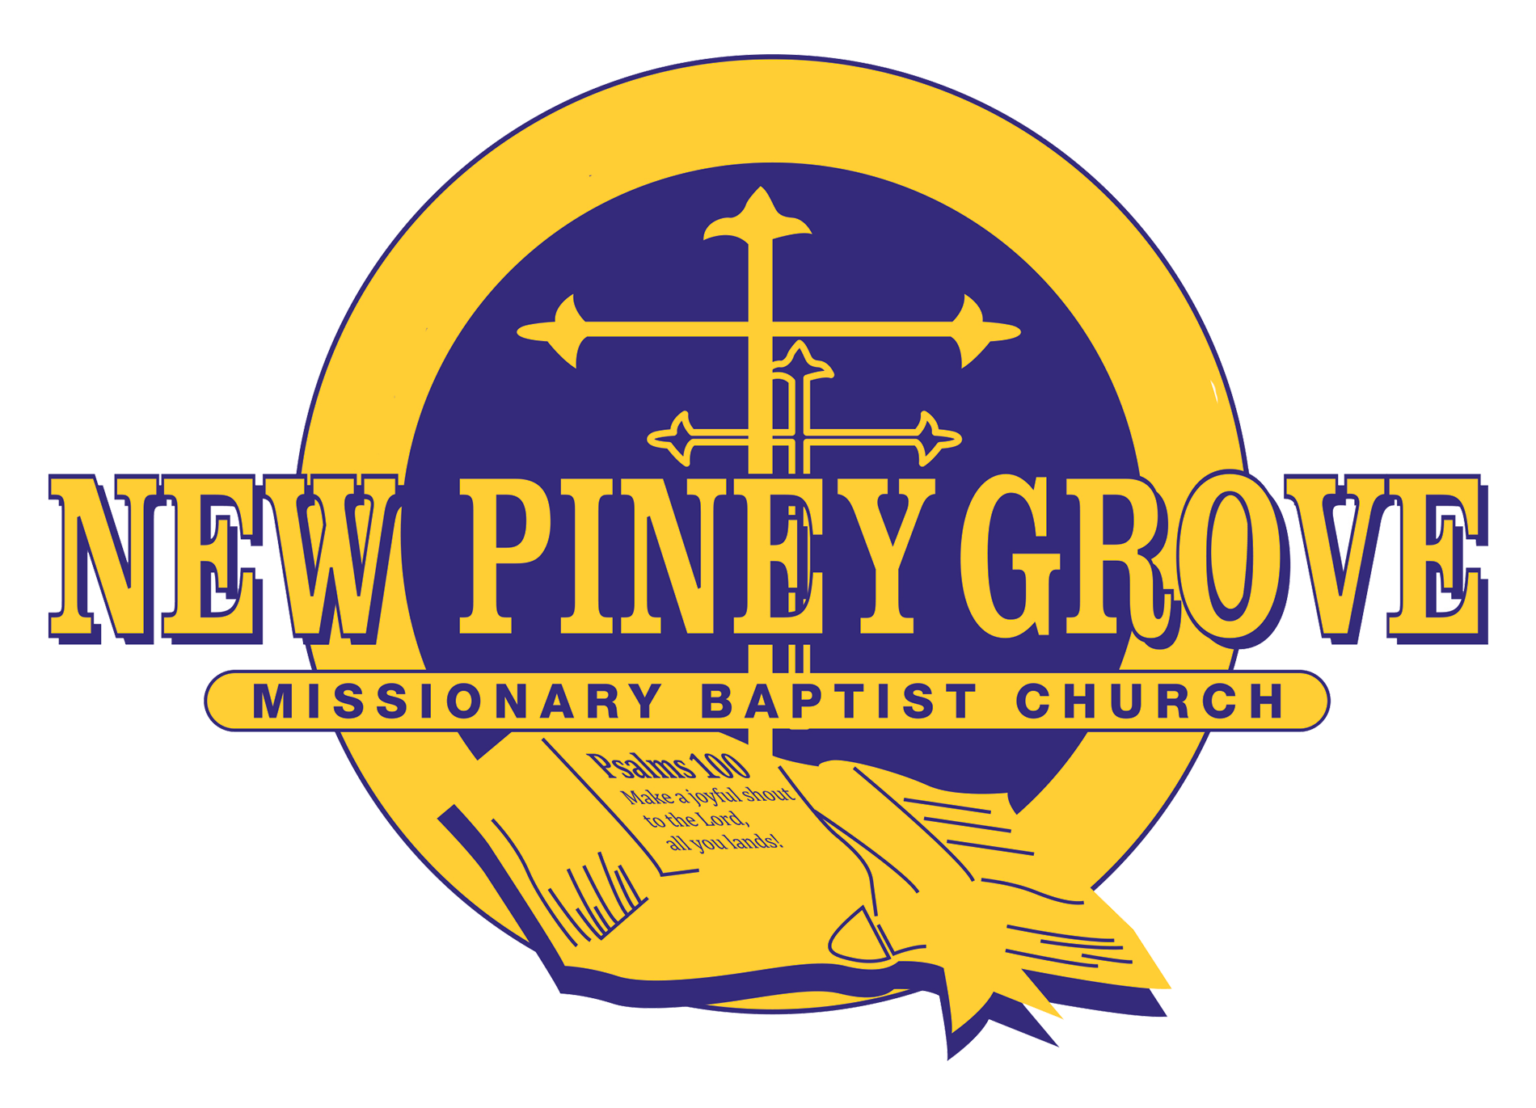 Join Our Church – New Piney Grove M.B.C.